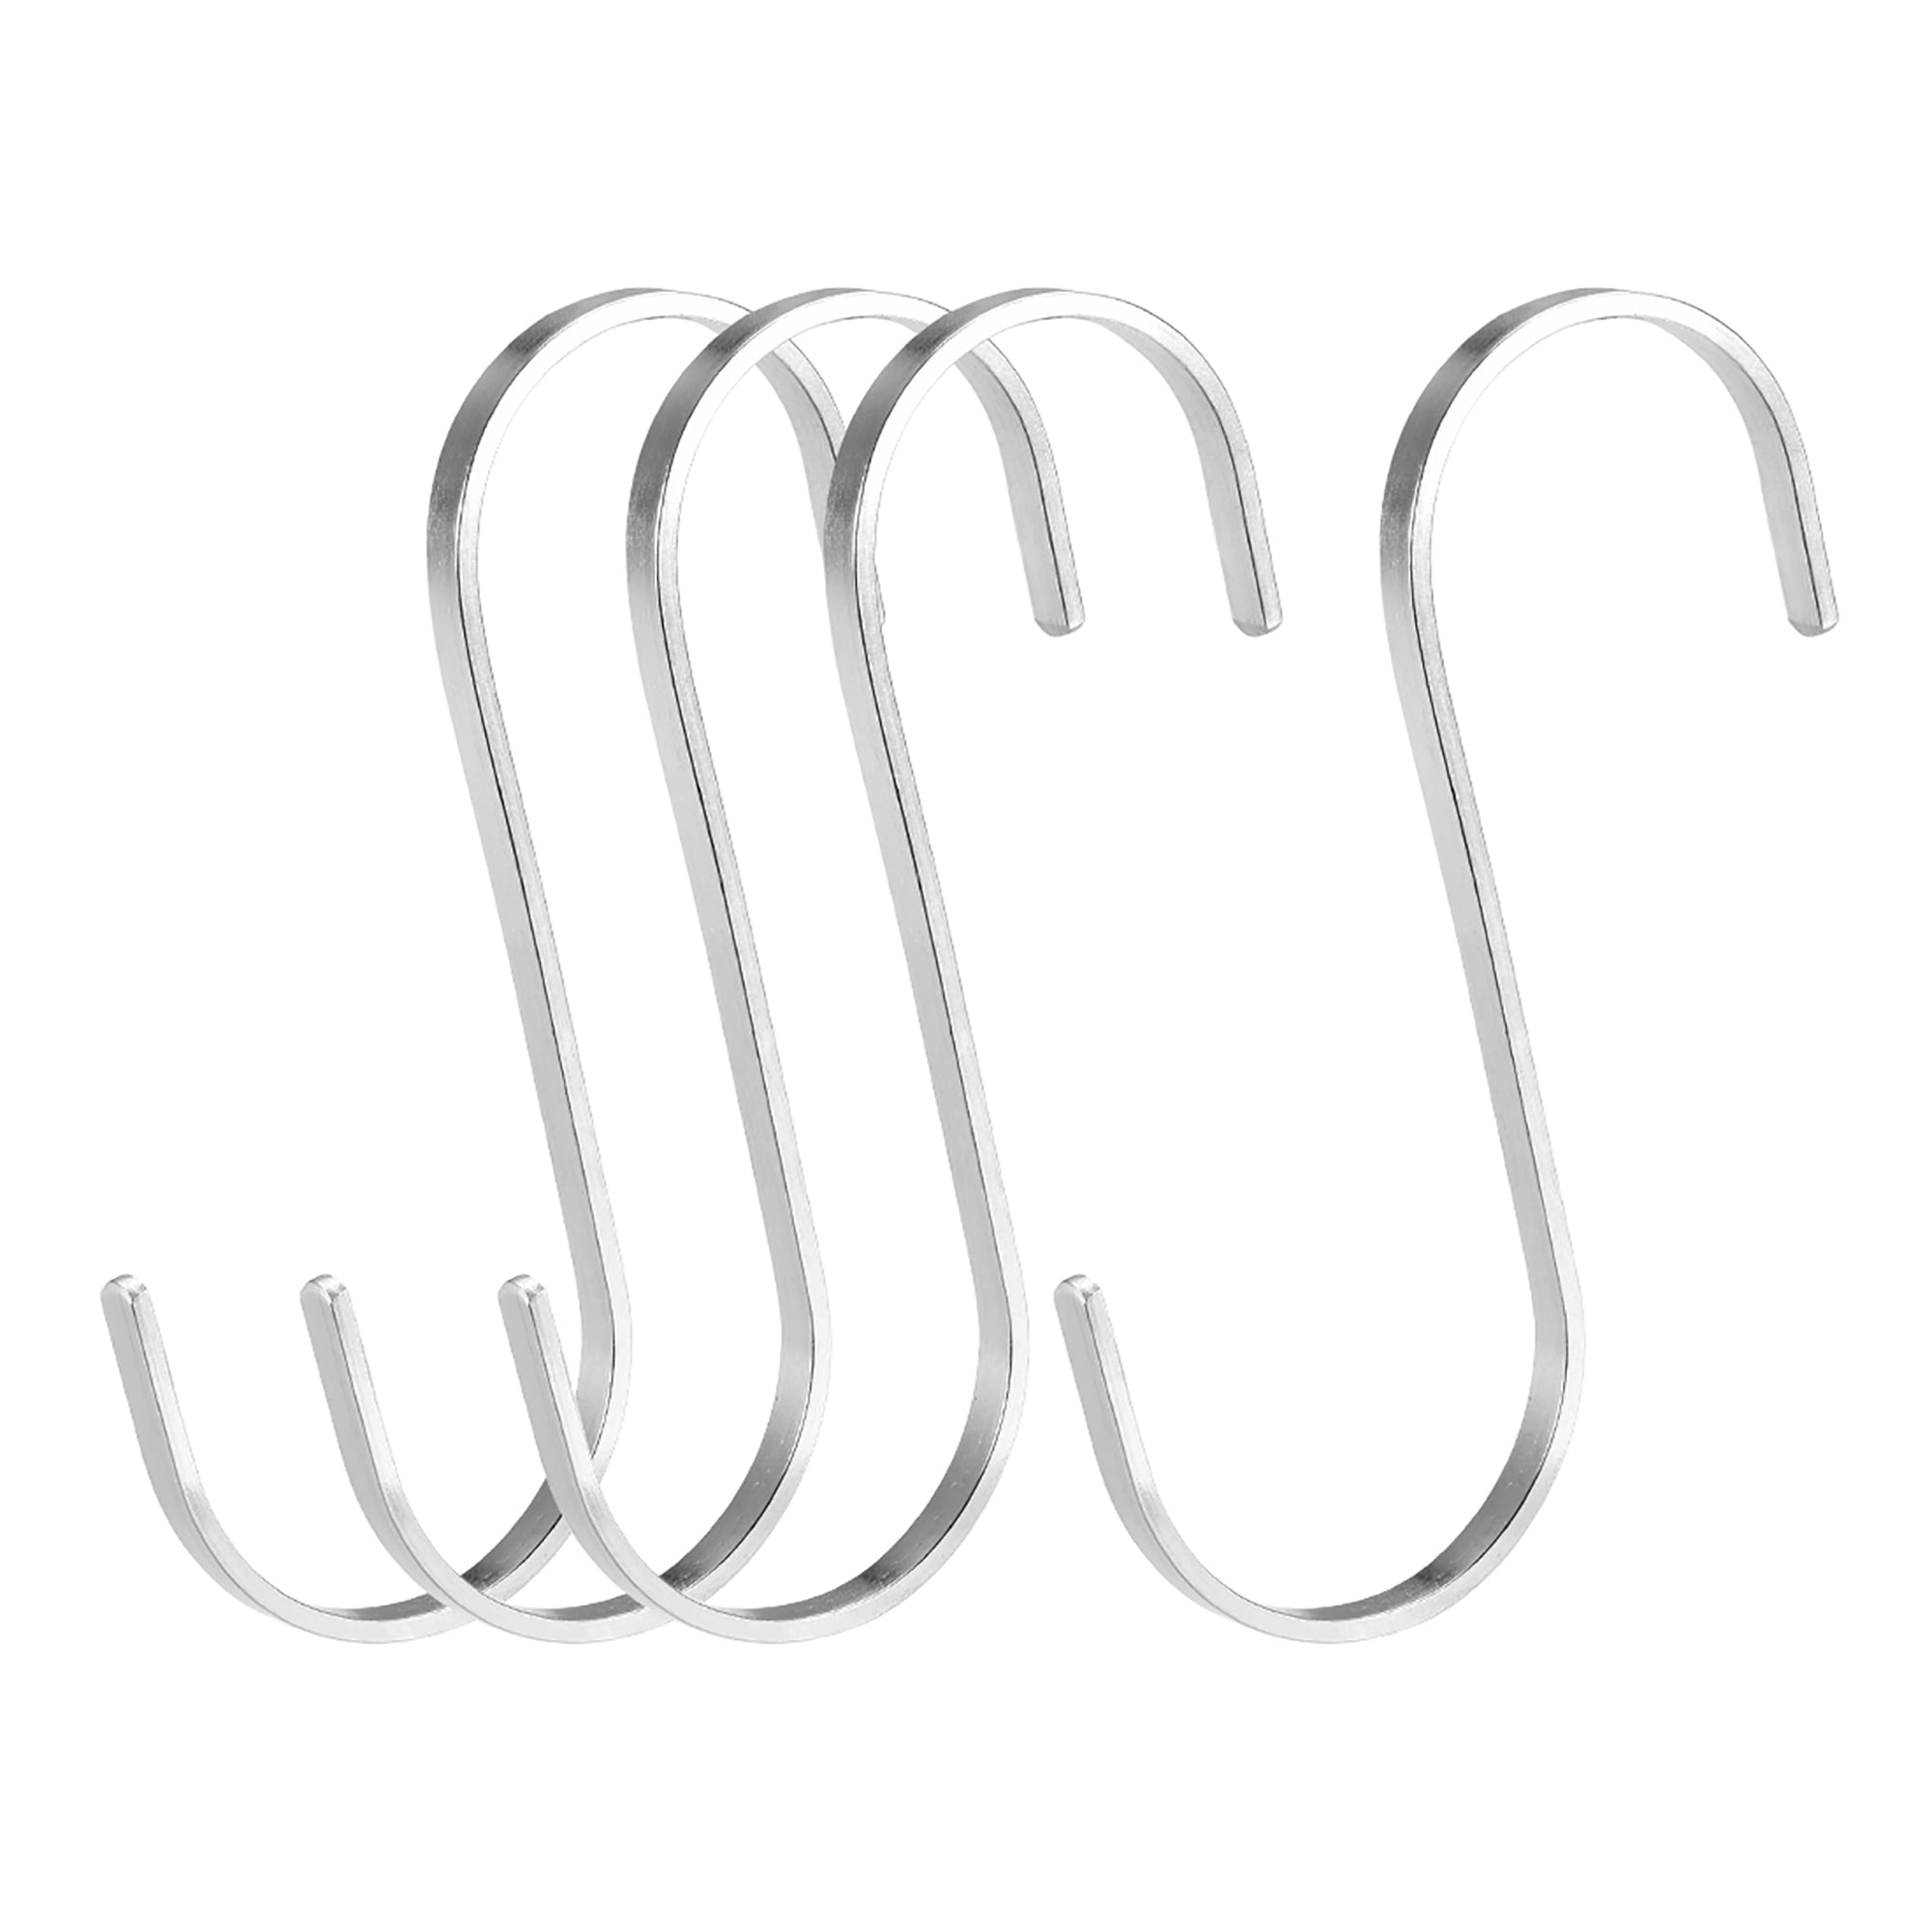 Stainless Steel S Hooks 4.4" Flat S Shaped Hook Hangers for Kitchen Stainless Steel Hooks For Outdoor Shower